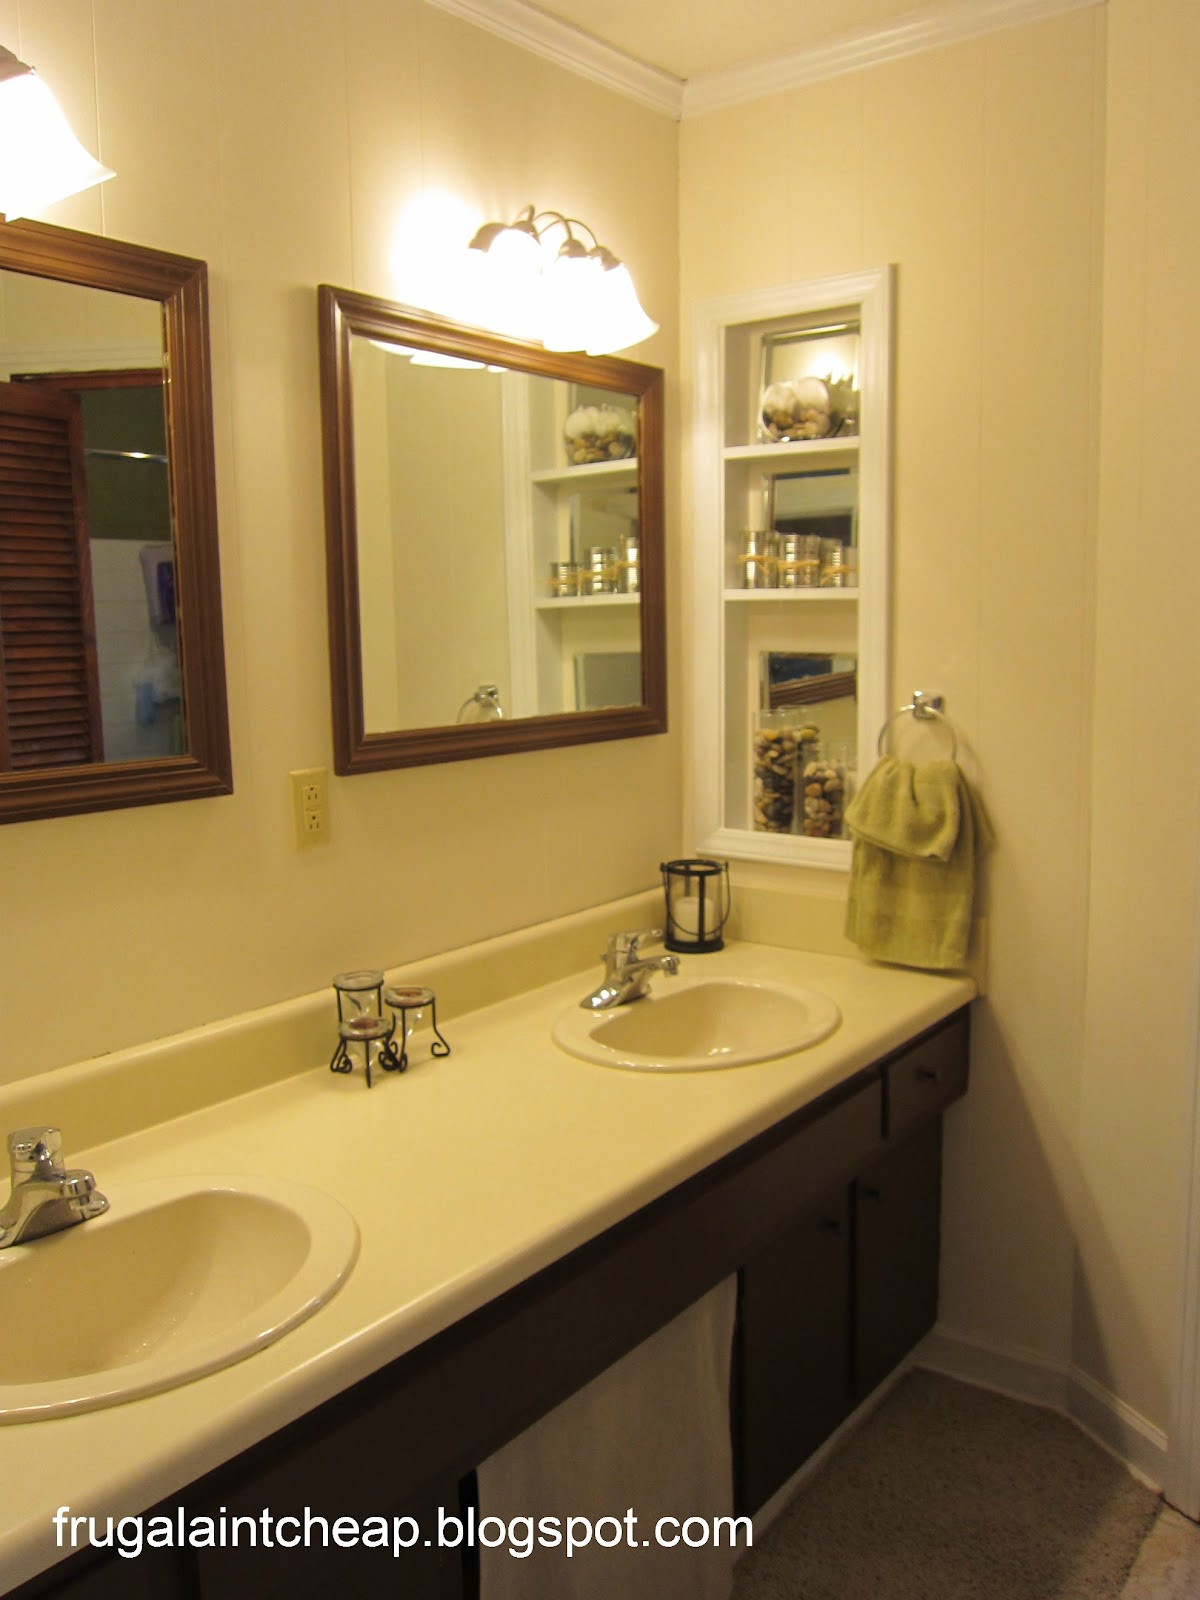 Cheap Bathroom Remodel Ideas
 Frugal Ain t Cheap Bathroom remodel From 1966 to 2012